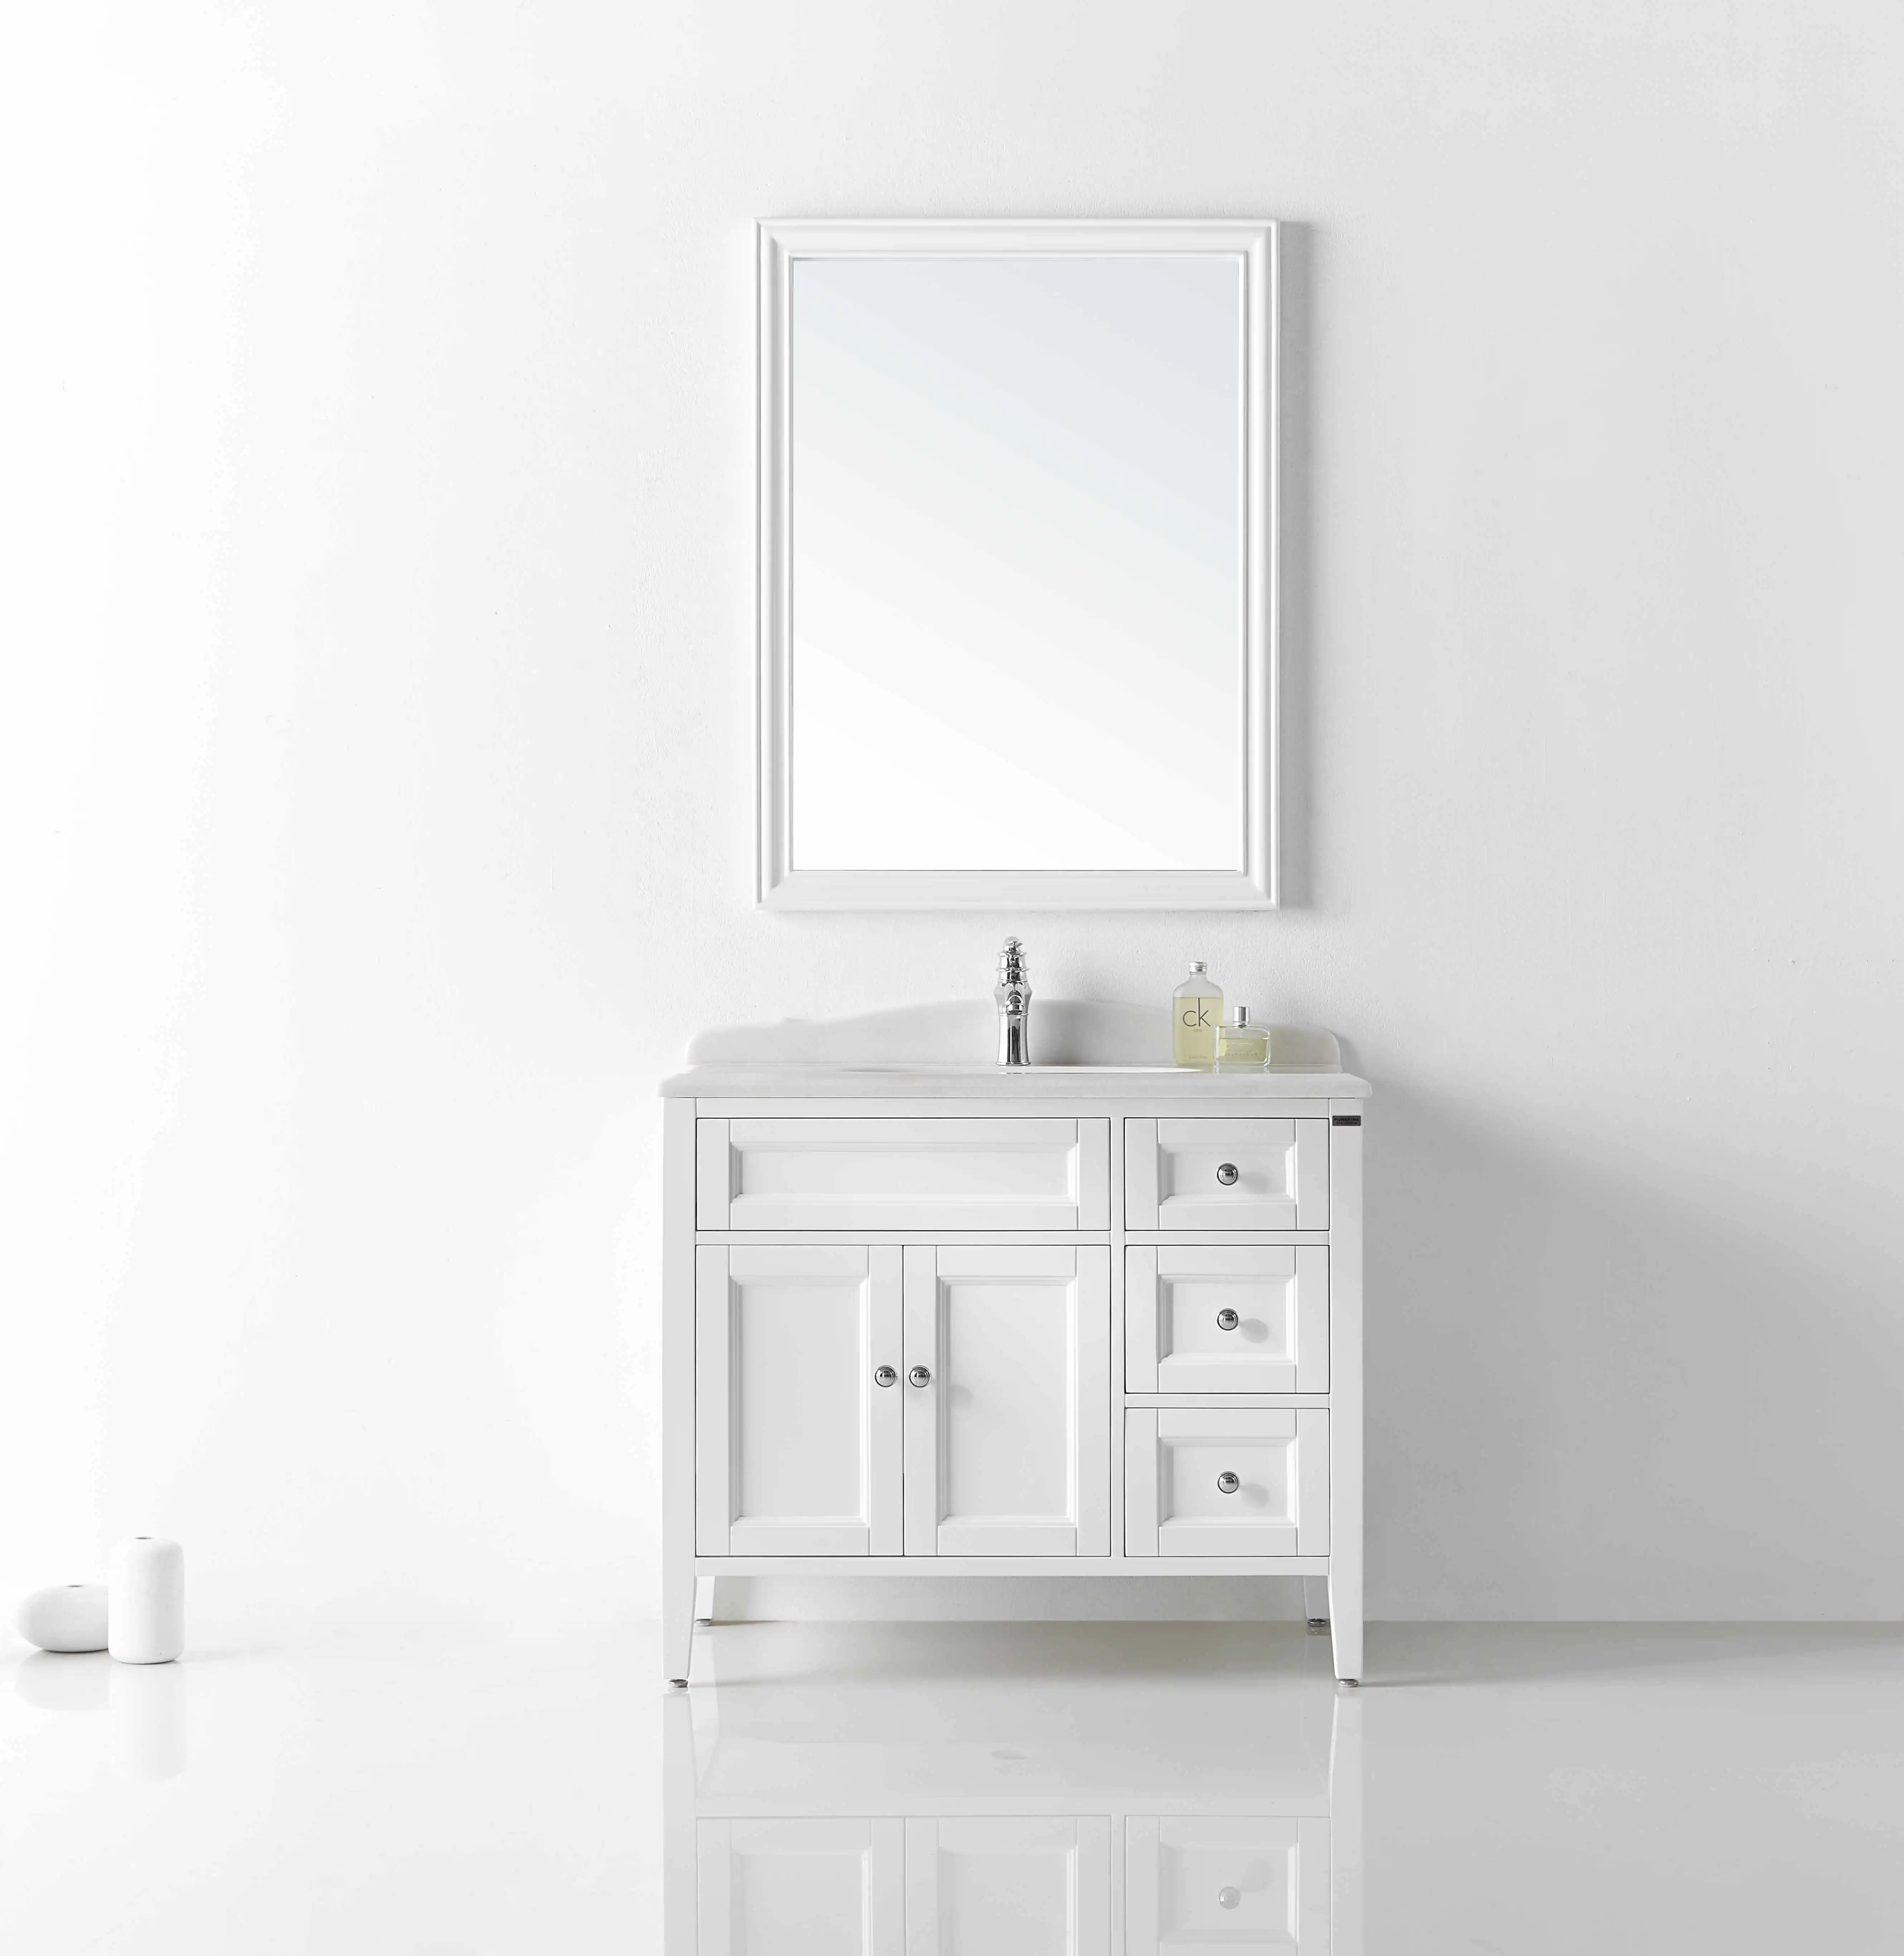 Frank Lowes 40 Inch Right Offset Bathroom Vanity With Sink Buy Lowes Vanity